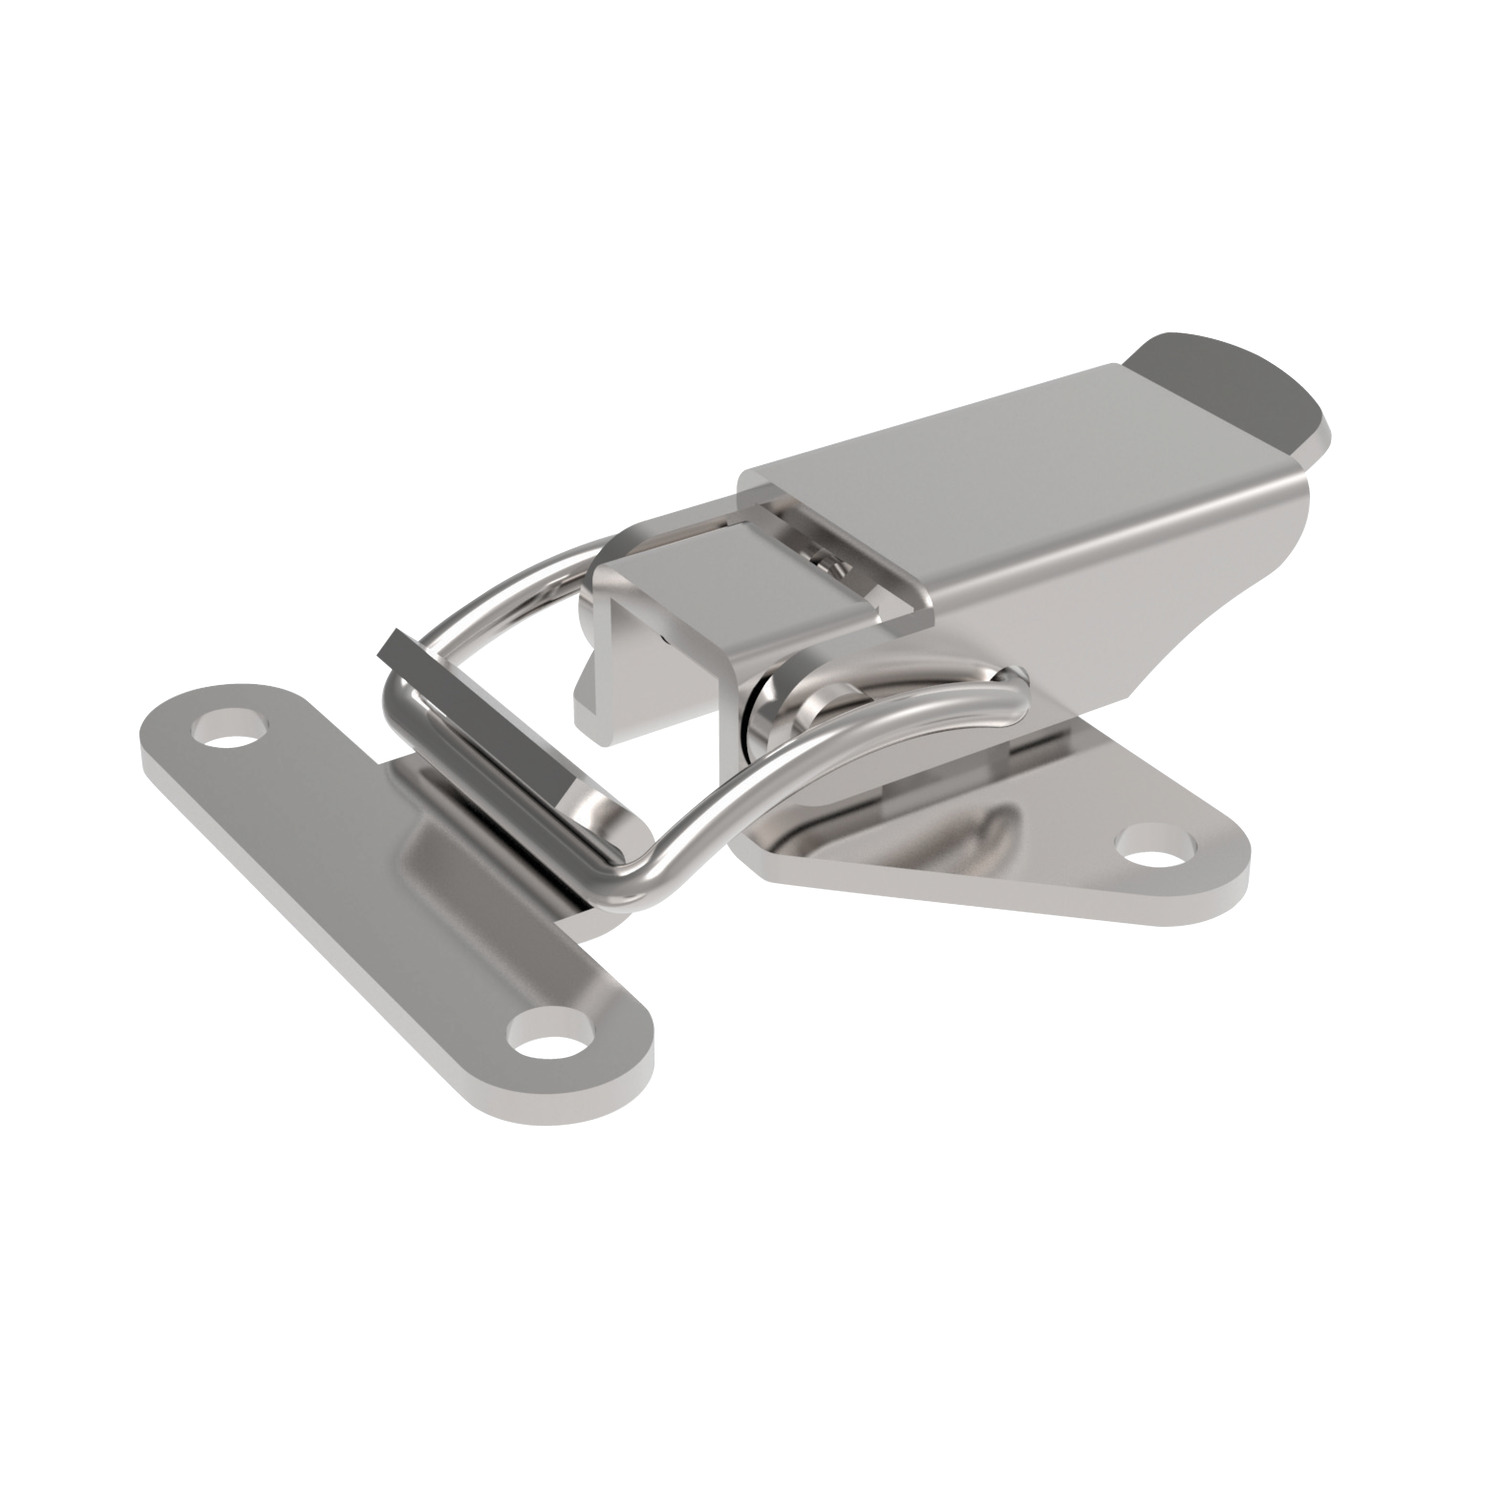 J0480.AC0030 Toggle Latches Stainless Steel - 52 - 11 - 33